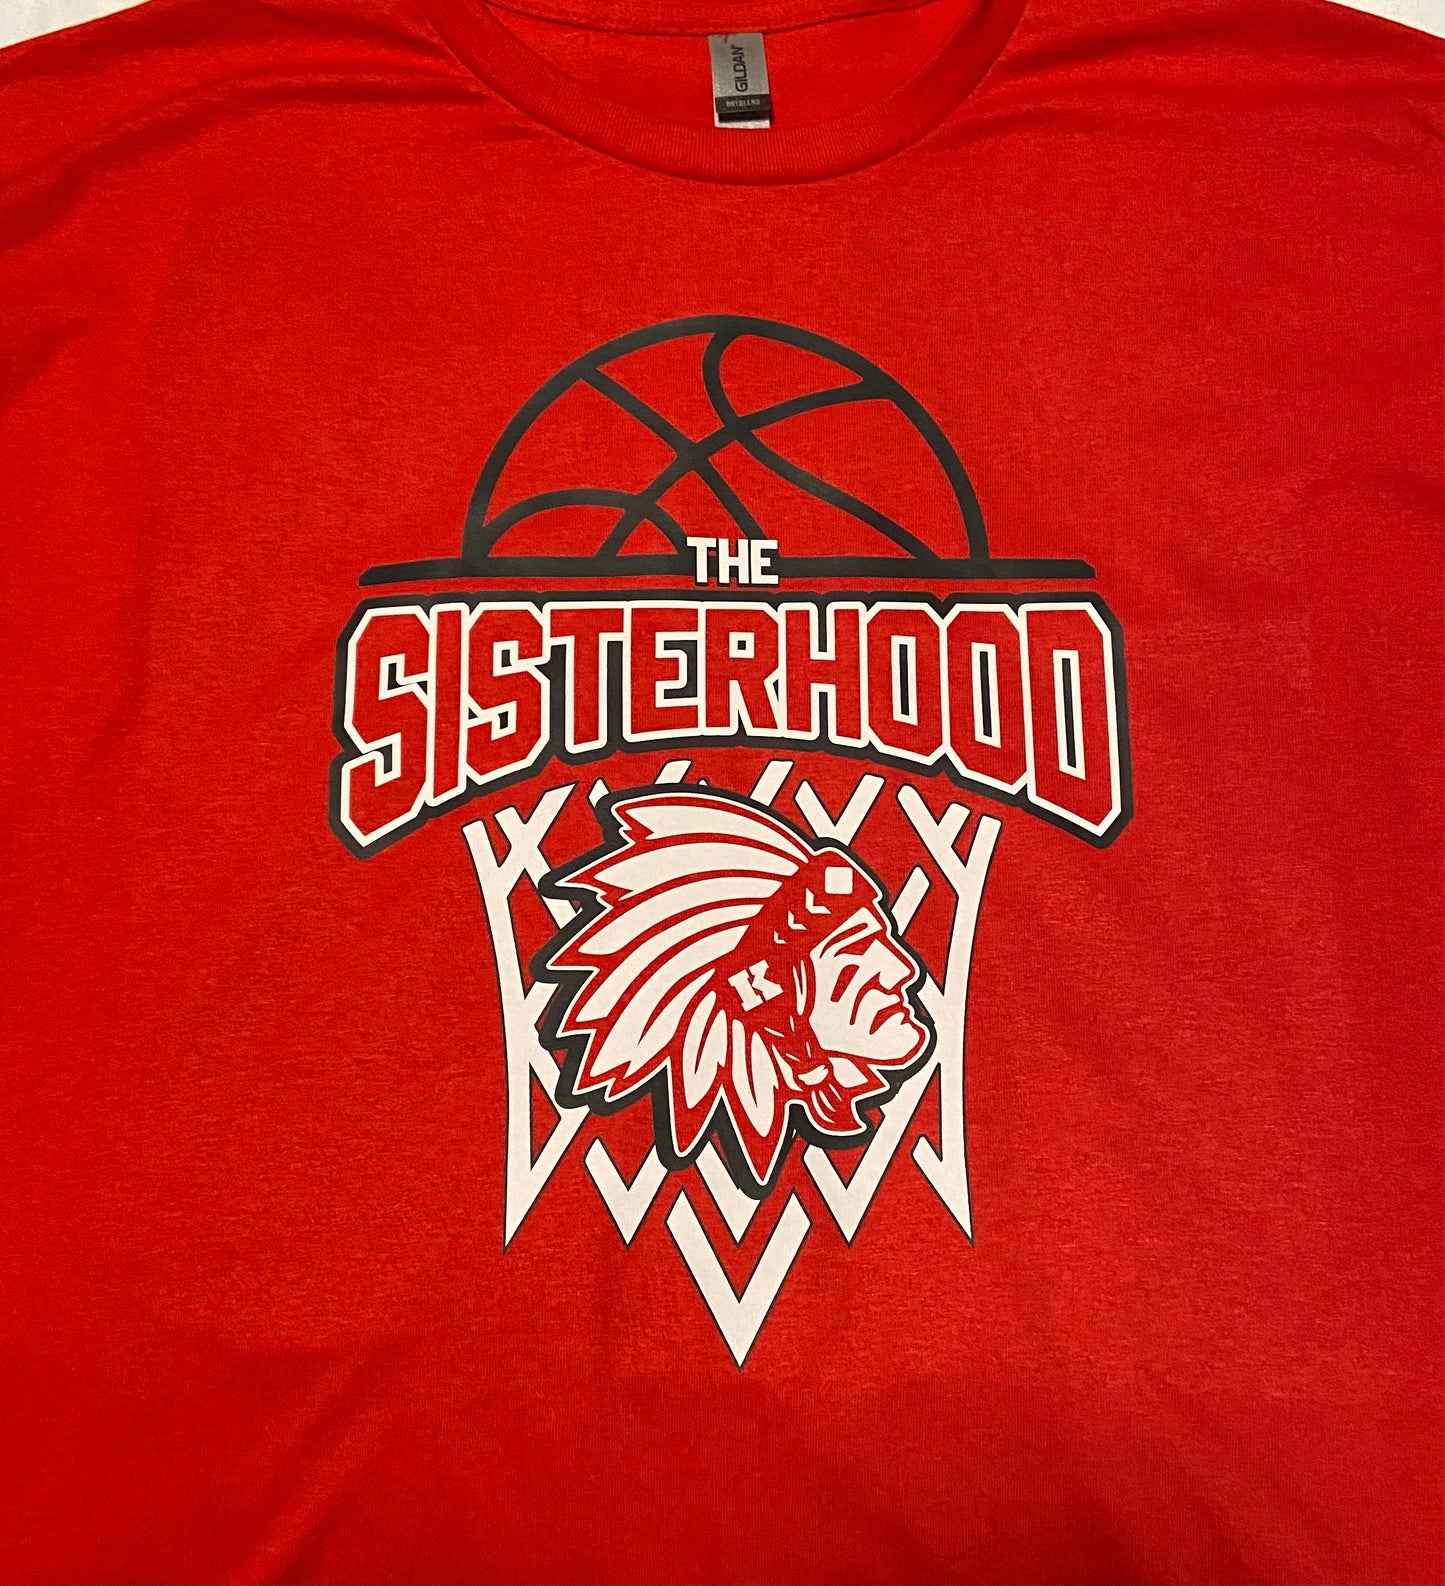 Knox Lady Redskins "The Sisterhood" Basketball T-shirt - Red - Adult and Youth Sizes